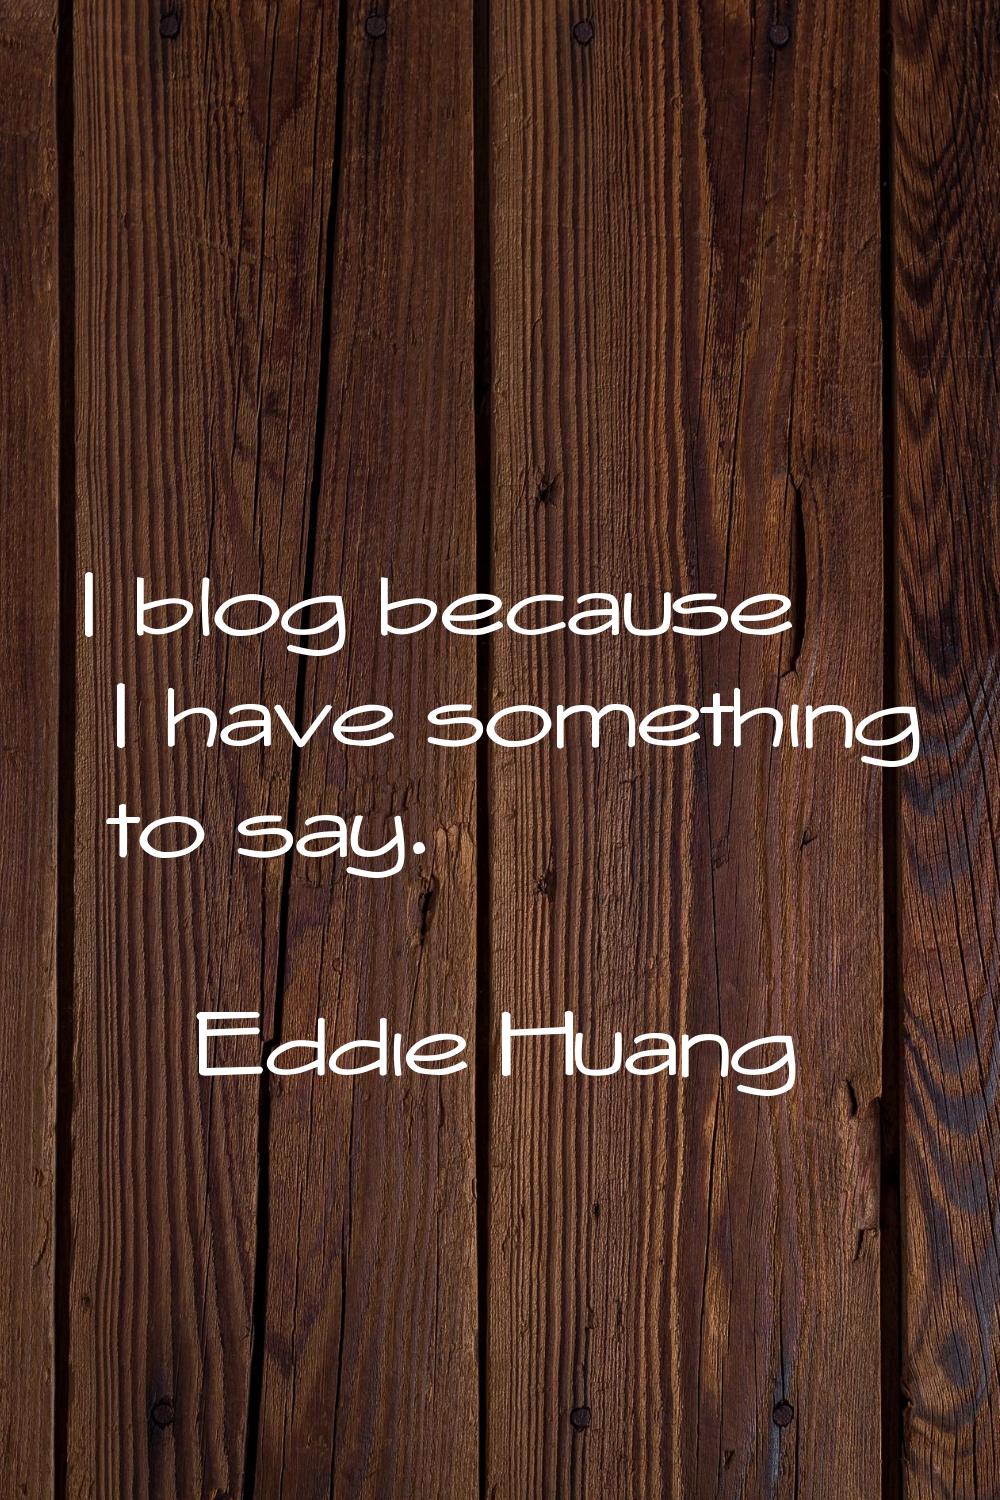 I blog because I have something to say.